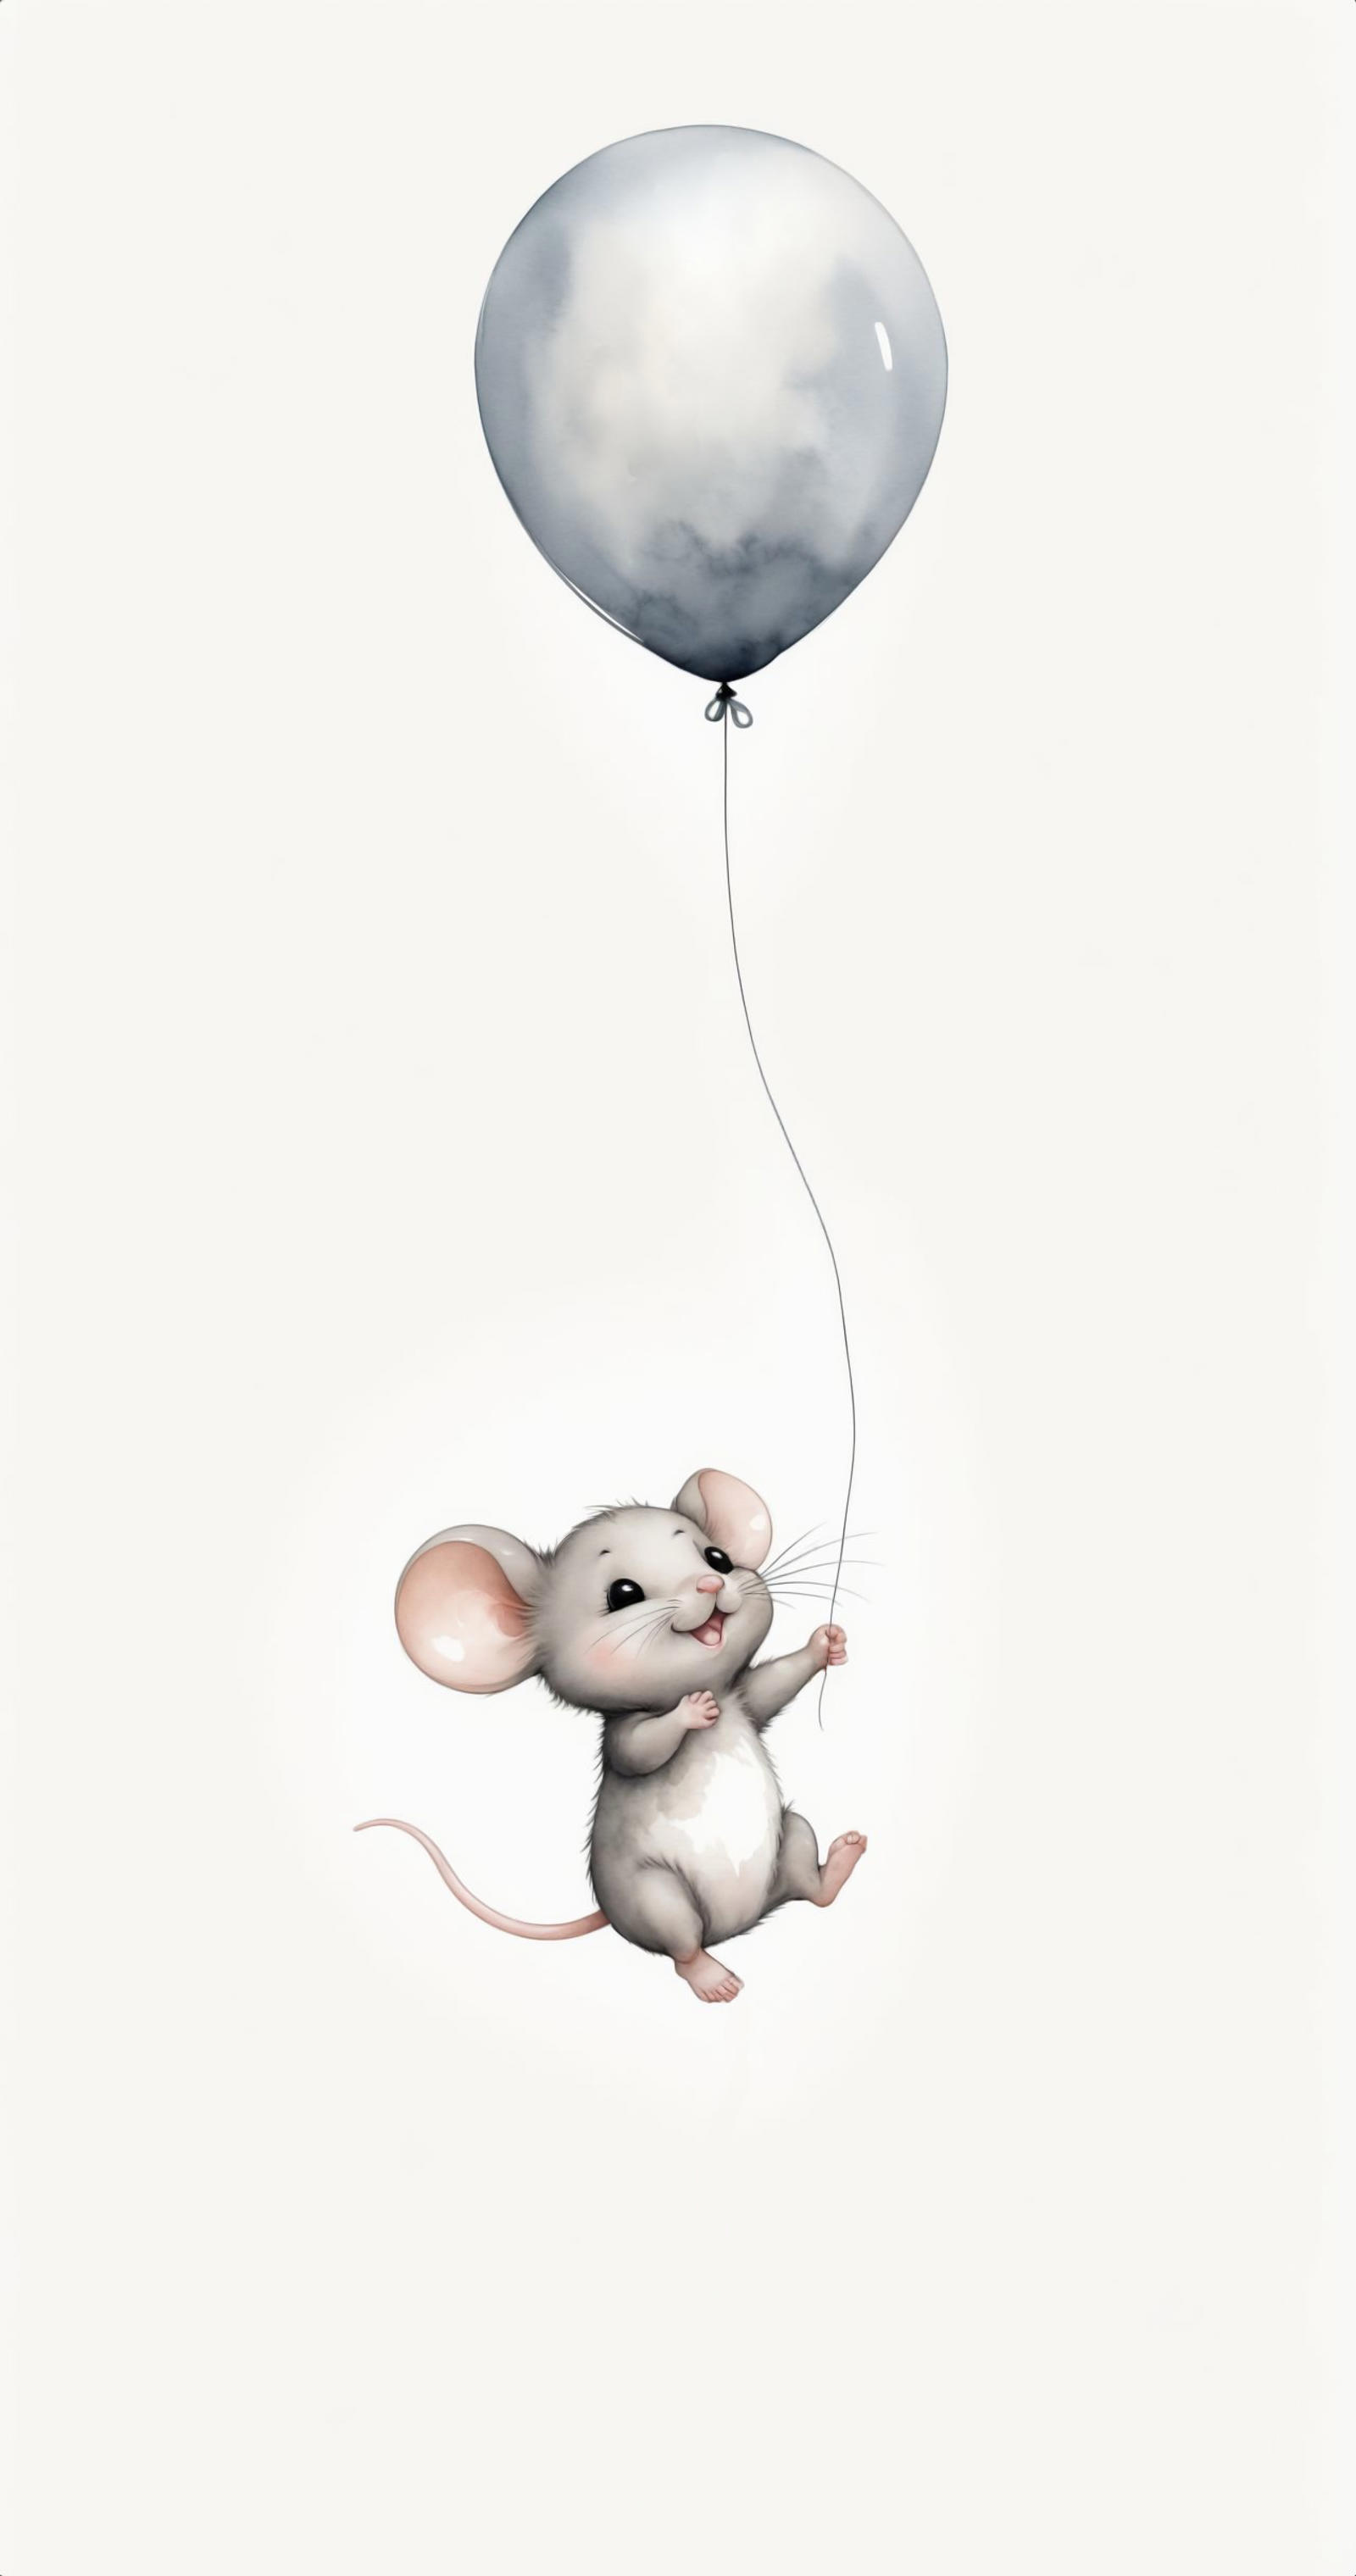 A cute mouse with a balloon holding it up.